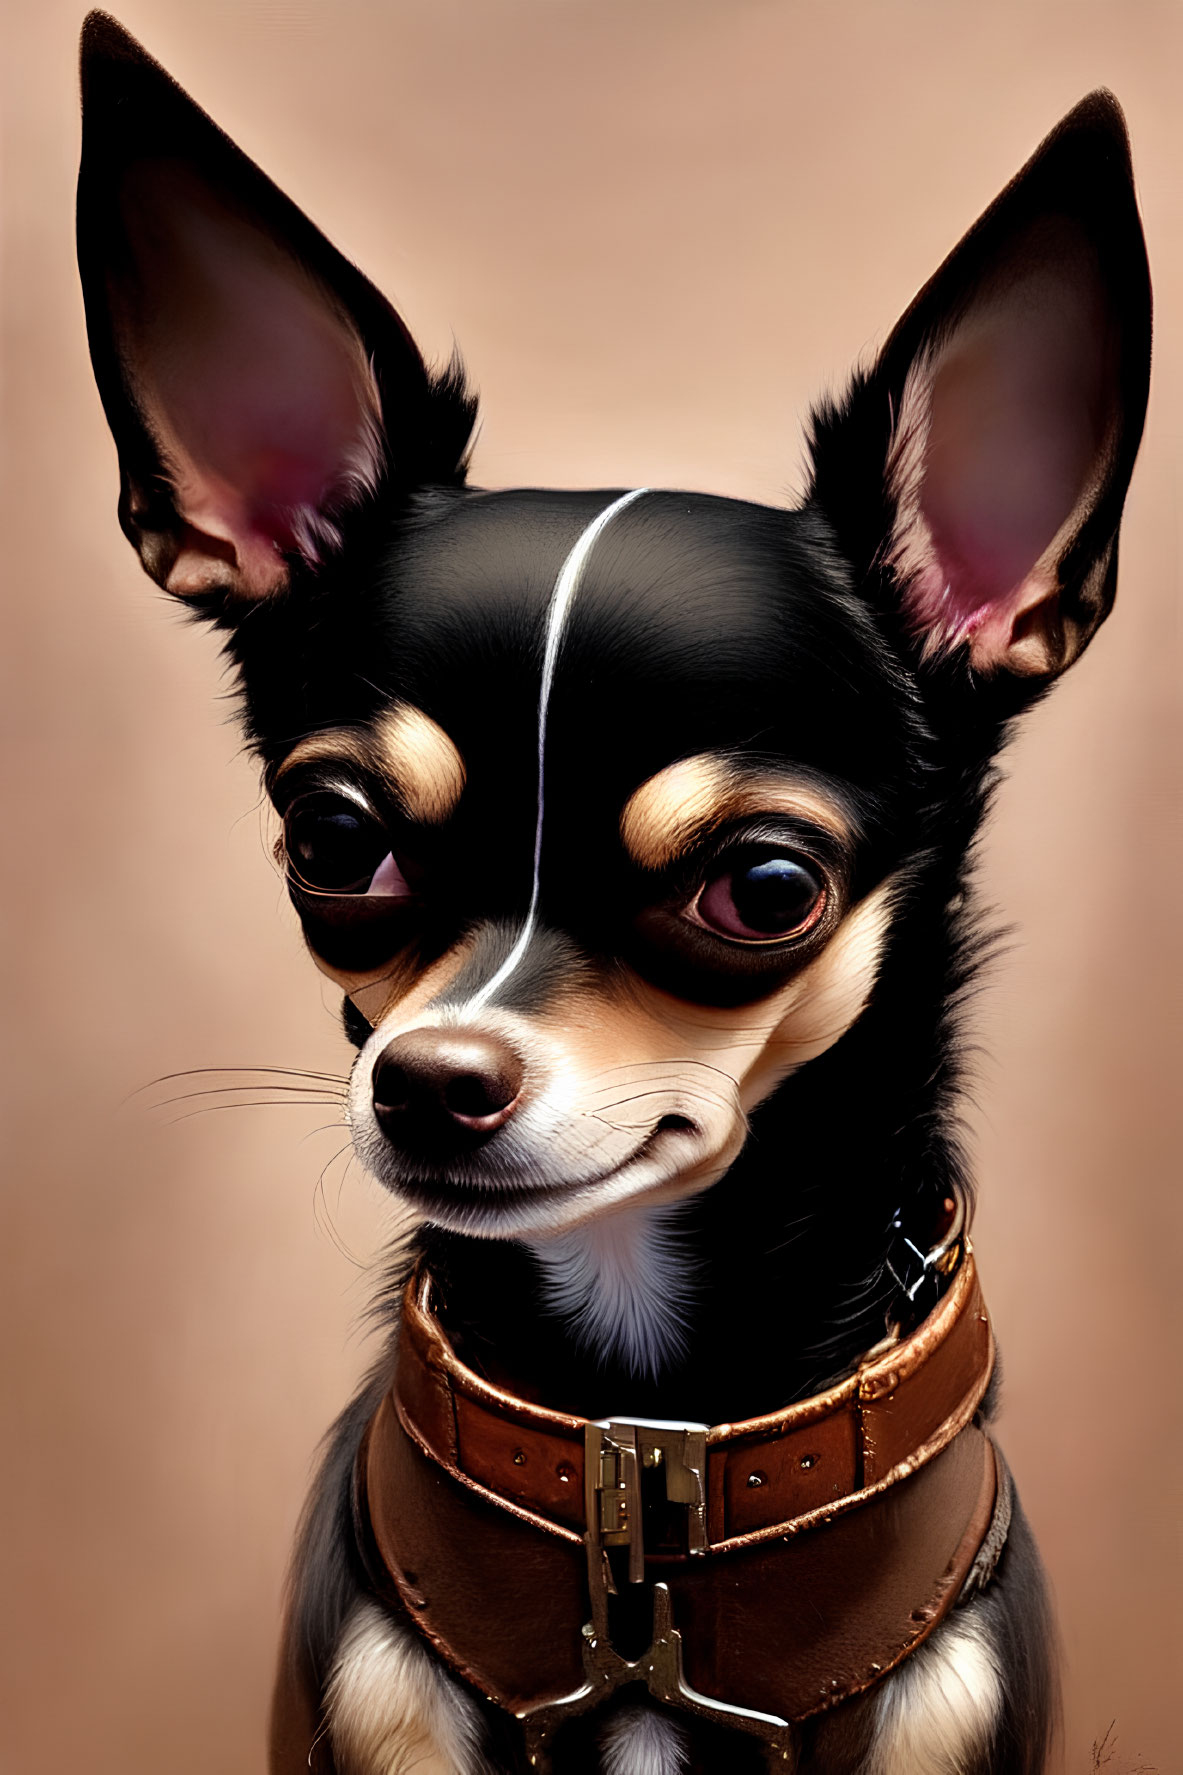 Stylized digital portrait of black Chihuahua with large ears in brown collar